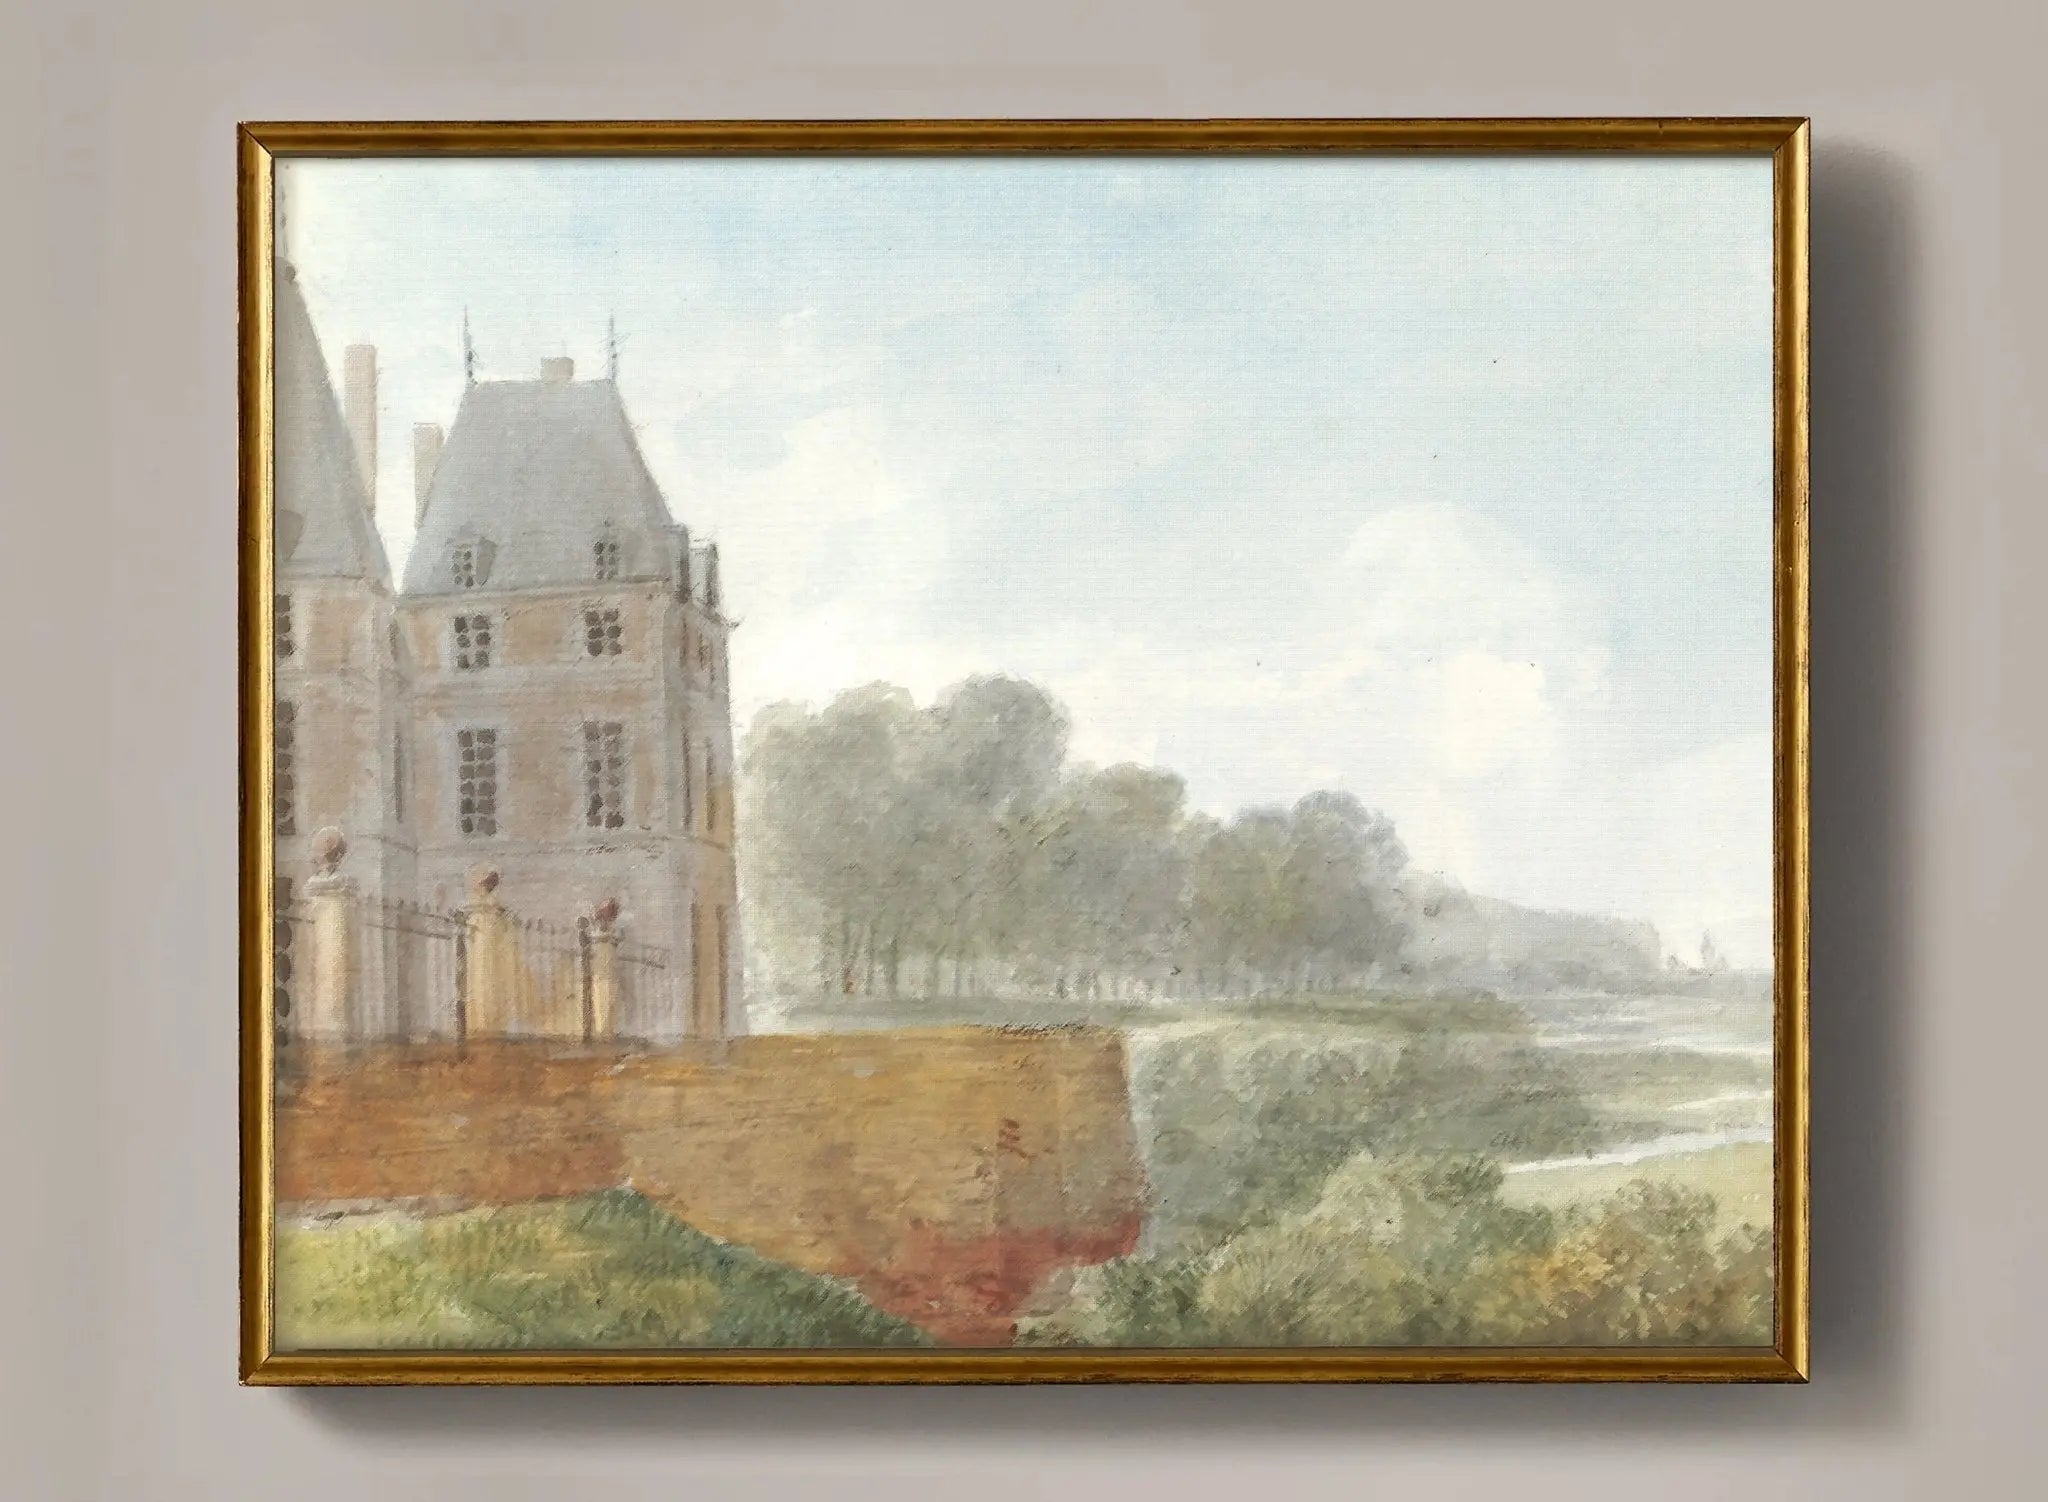 Study of a Chateau: French Country Watercolors - Emblem Atelier